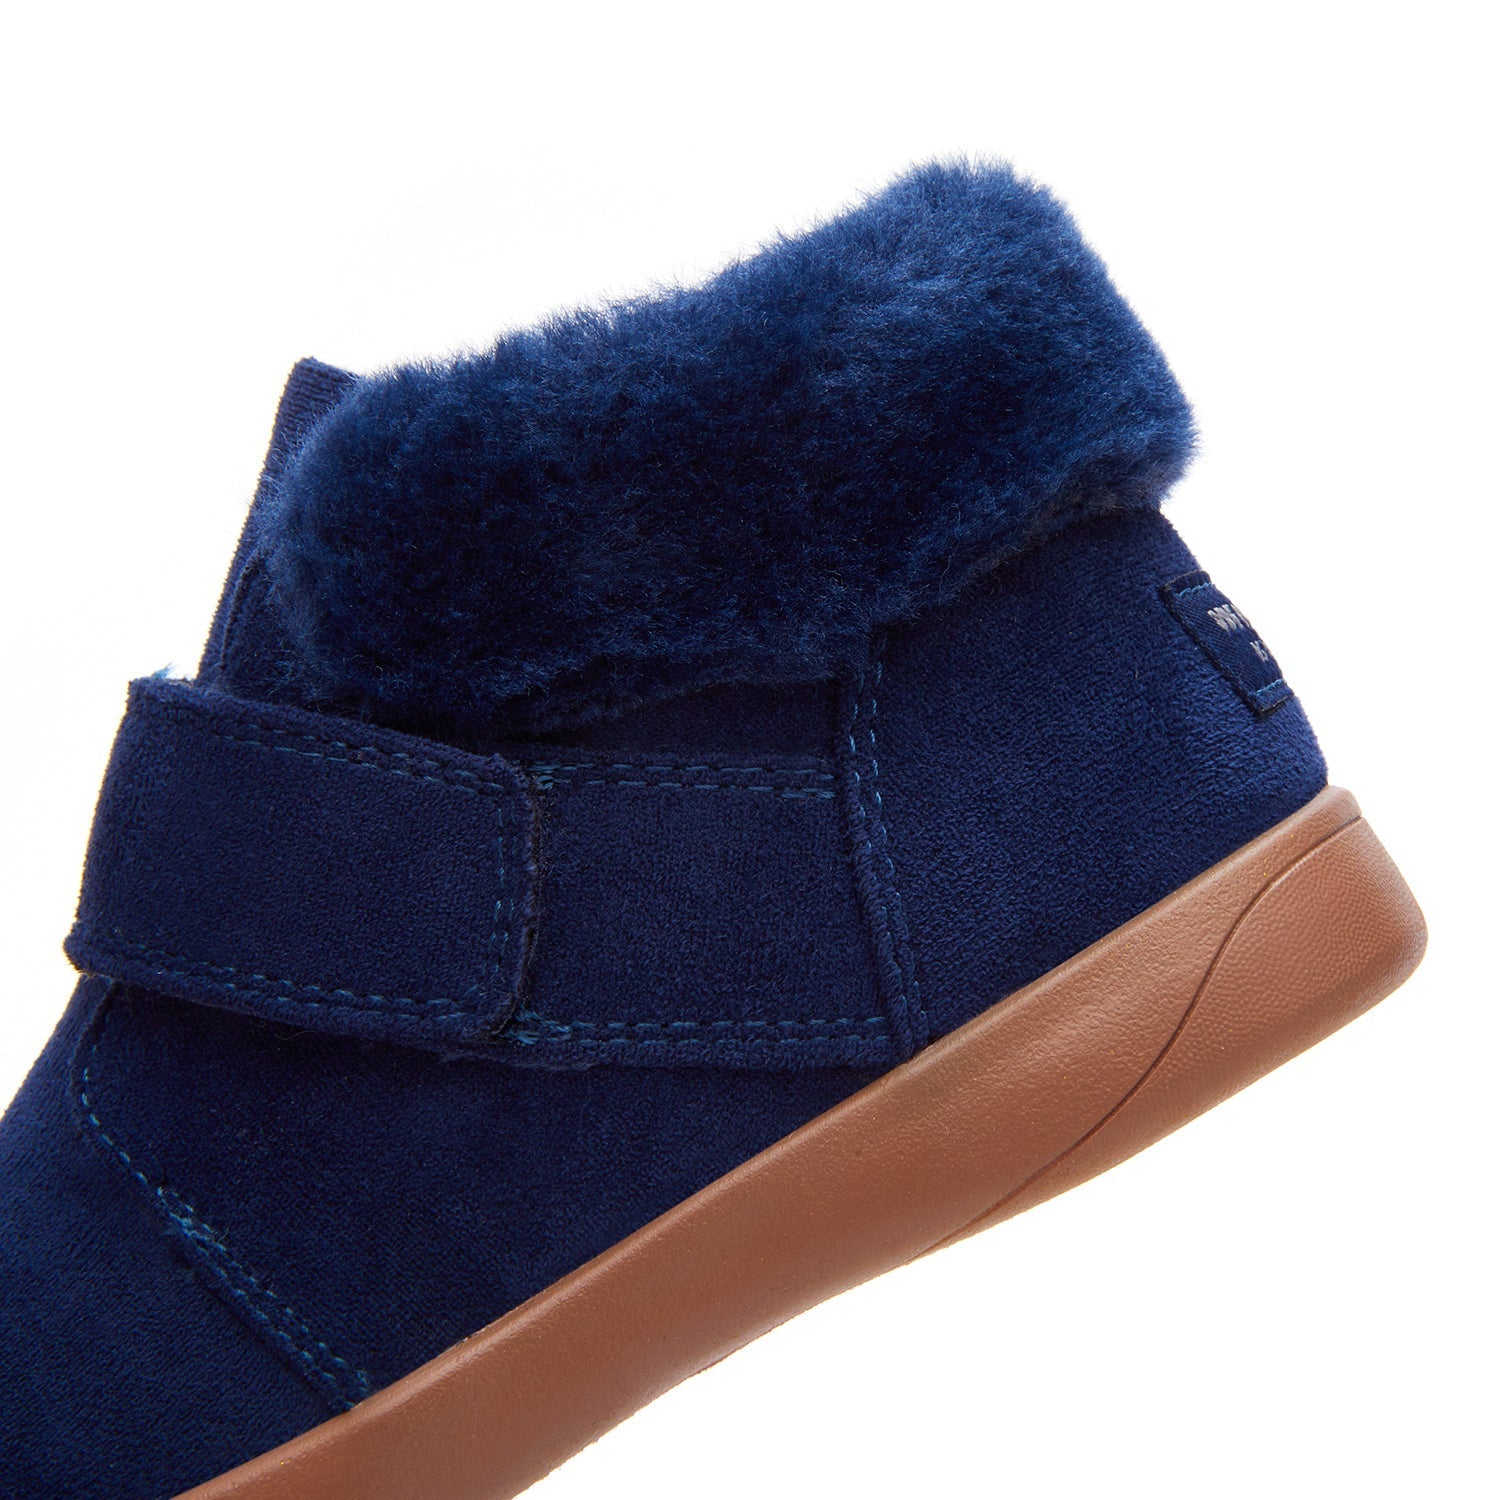 Kids Unisex Daily Strap Furry Low Ankle Boots